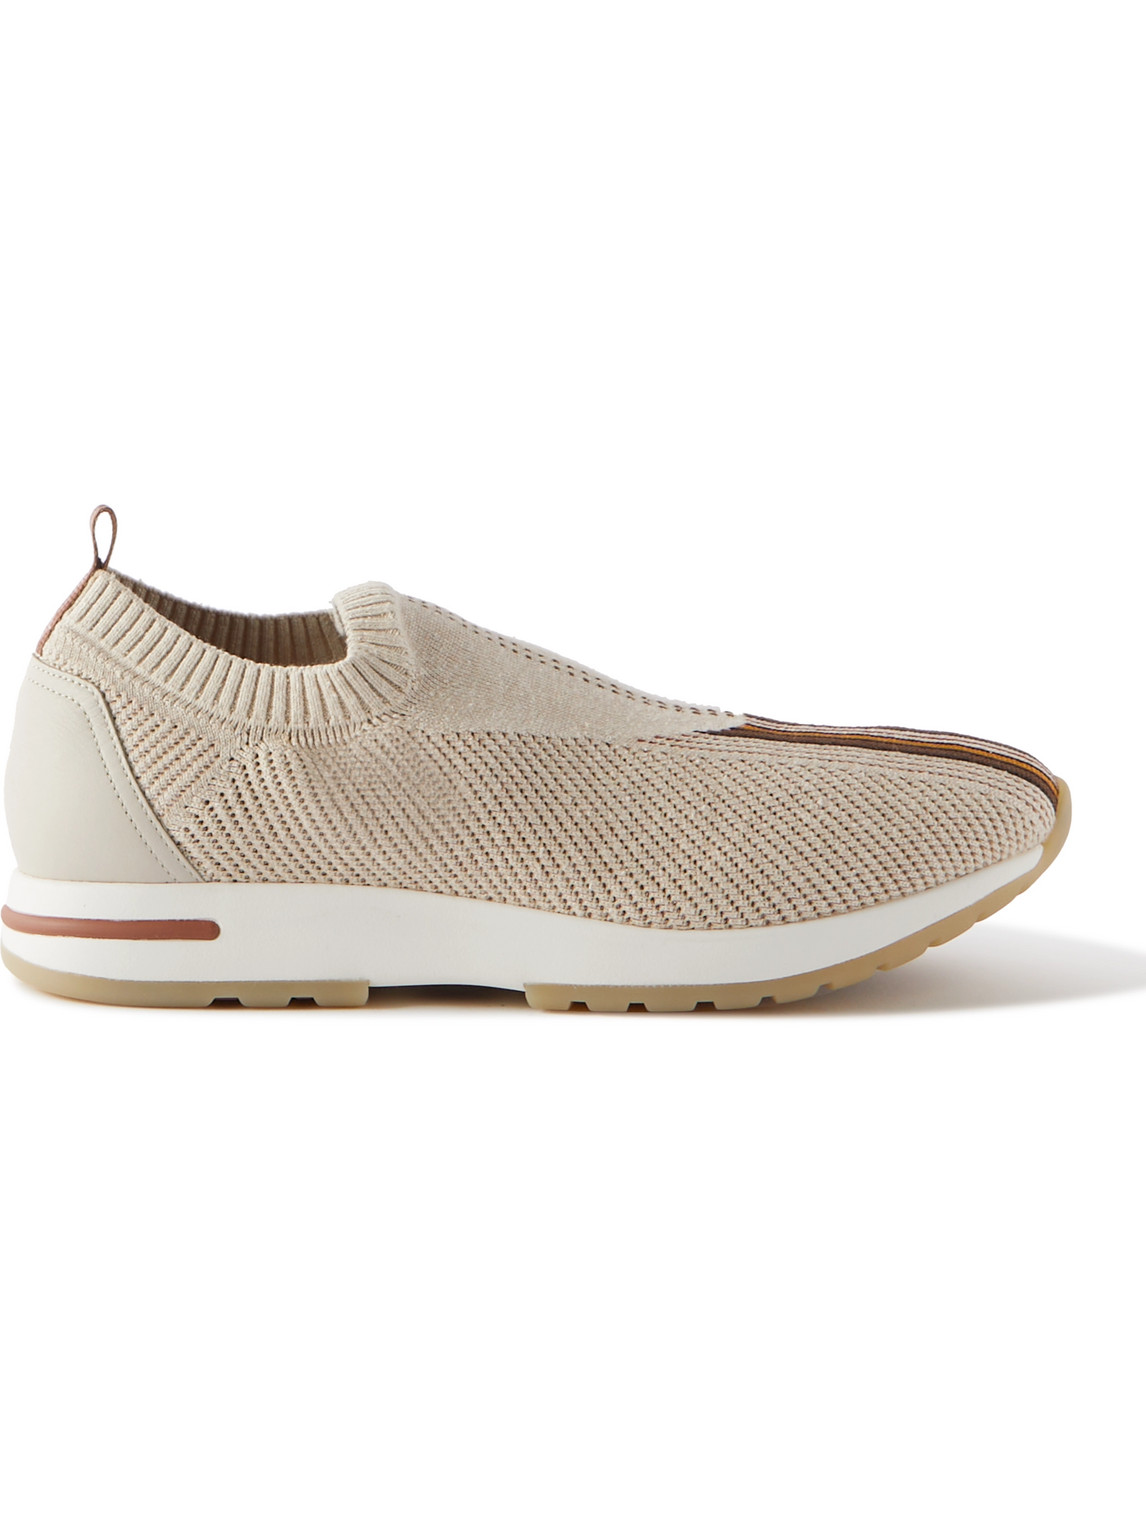 Loro Piana 360 Lp Flexy Walk Leather-trimmed Linen And Silk-blend Slip-on Trainers In Neutrals